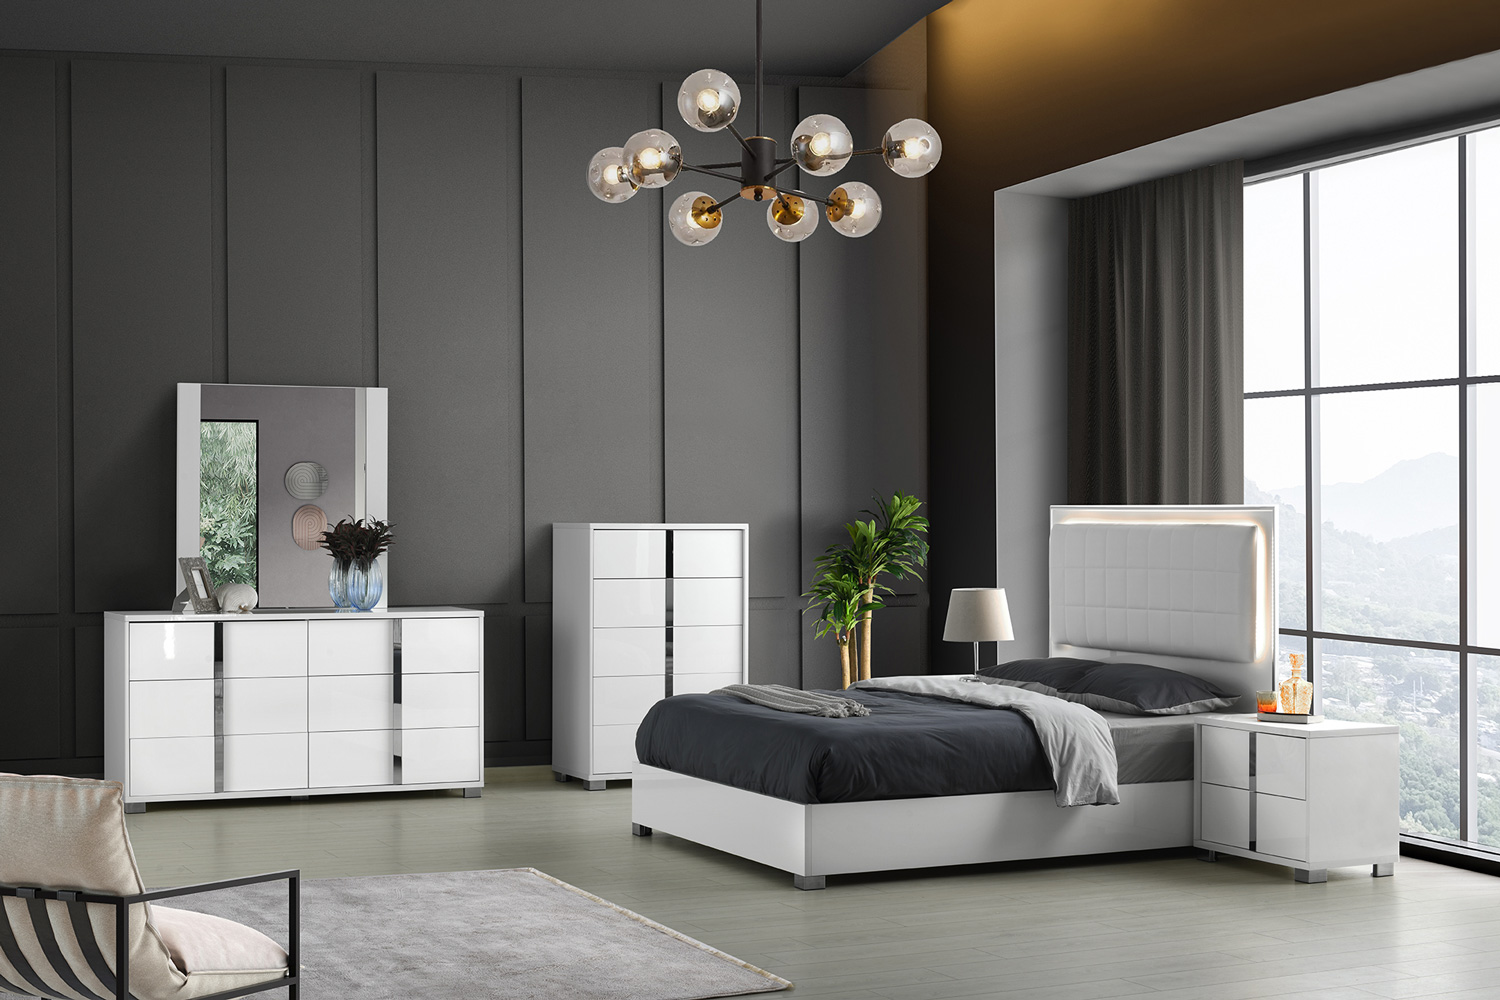 Unique Leather Design Master Bedroom with Storage Accessories - Click Image to Close